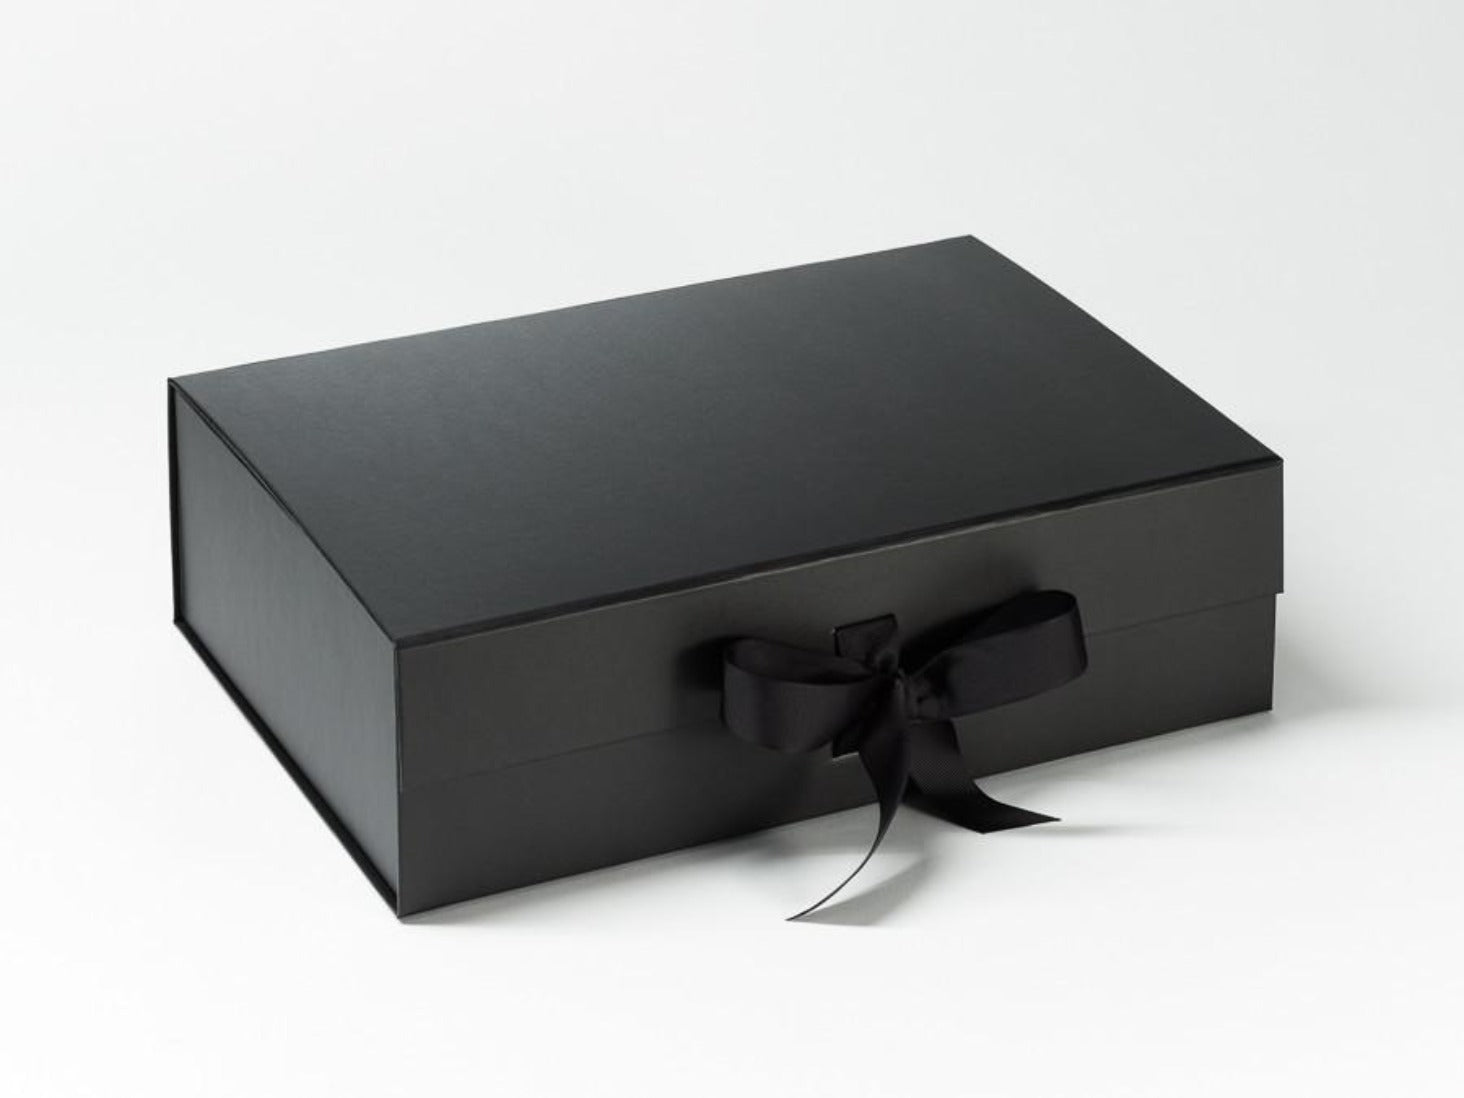 A4 Black Folding Gift Box with fixed ribbon ties